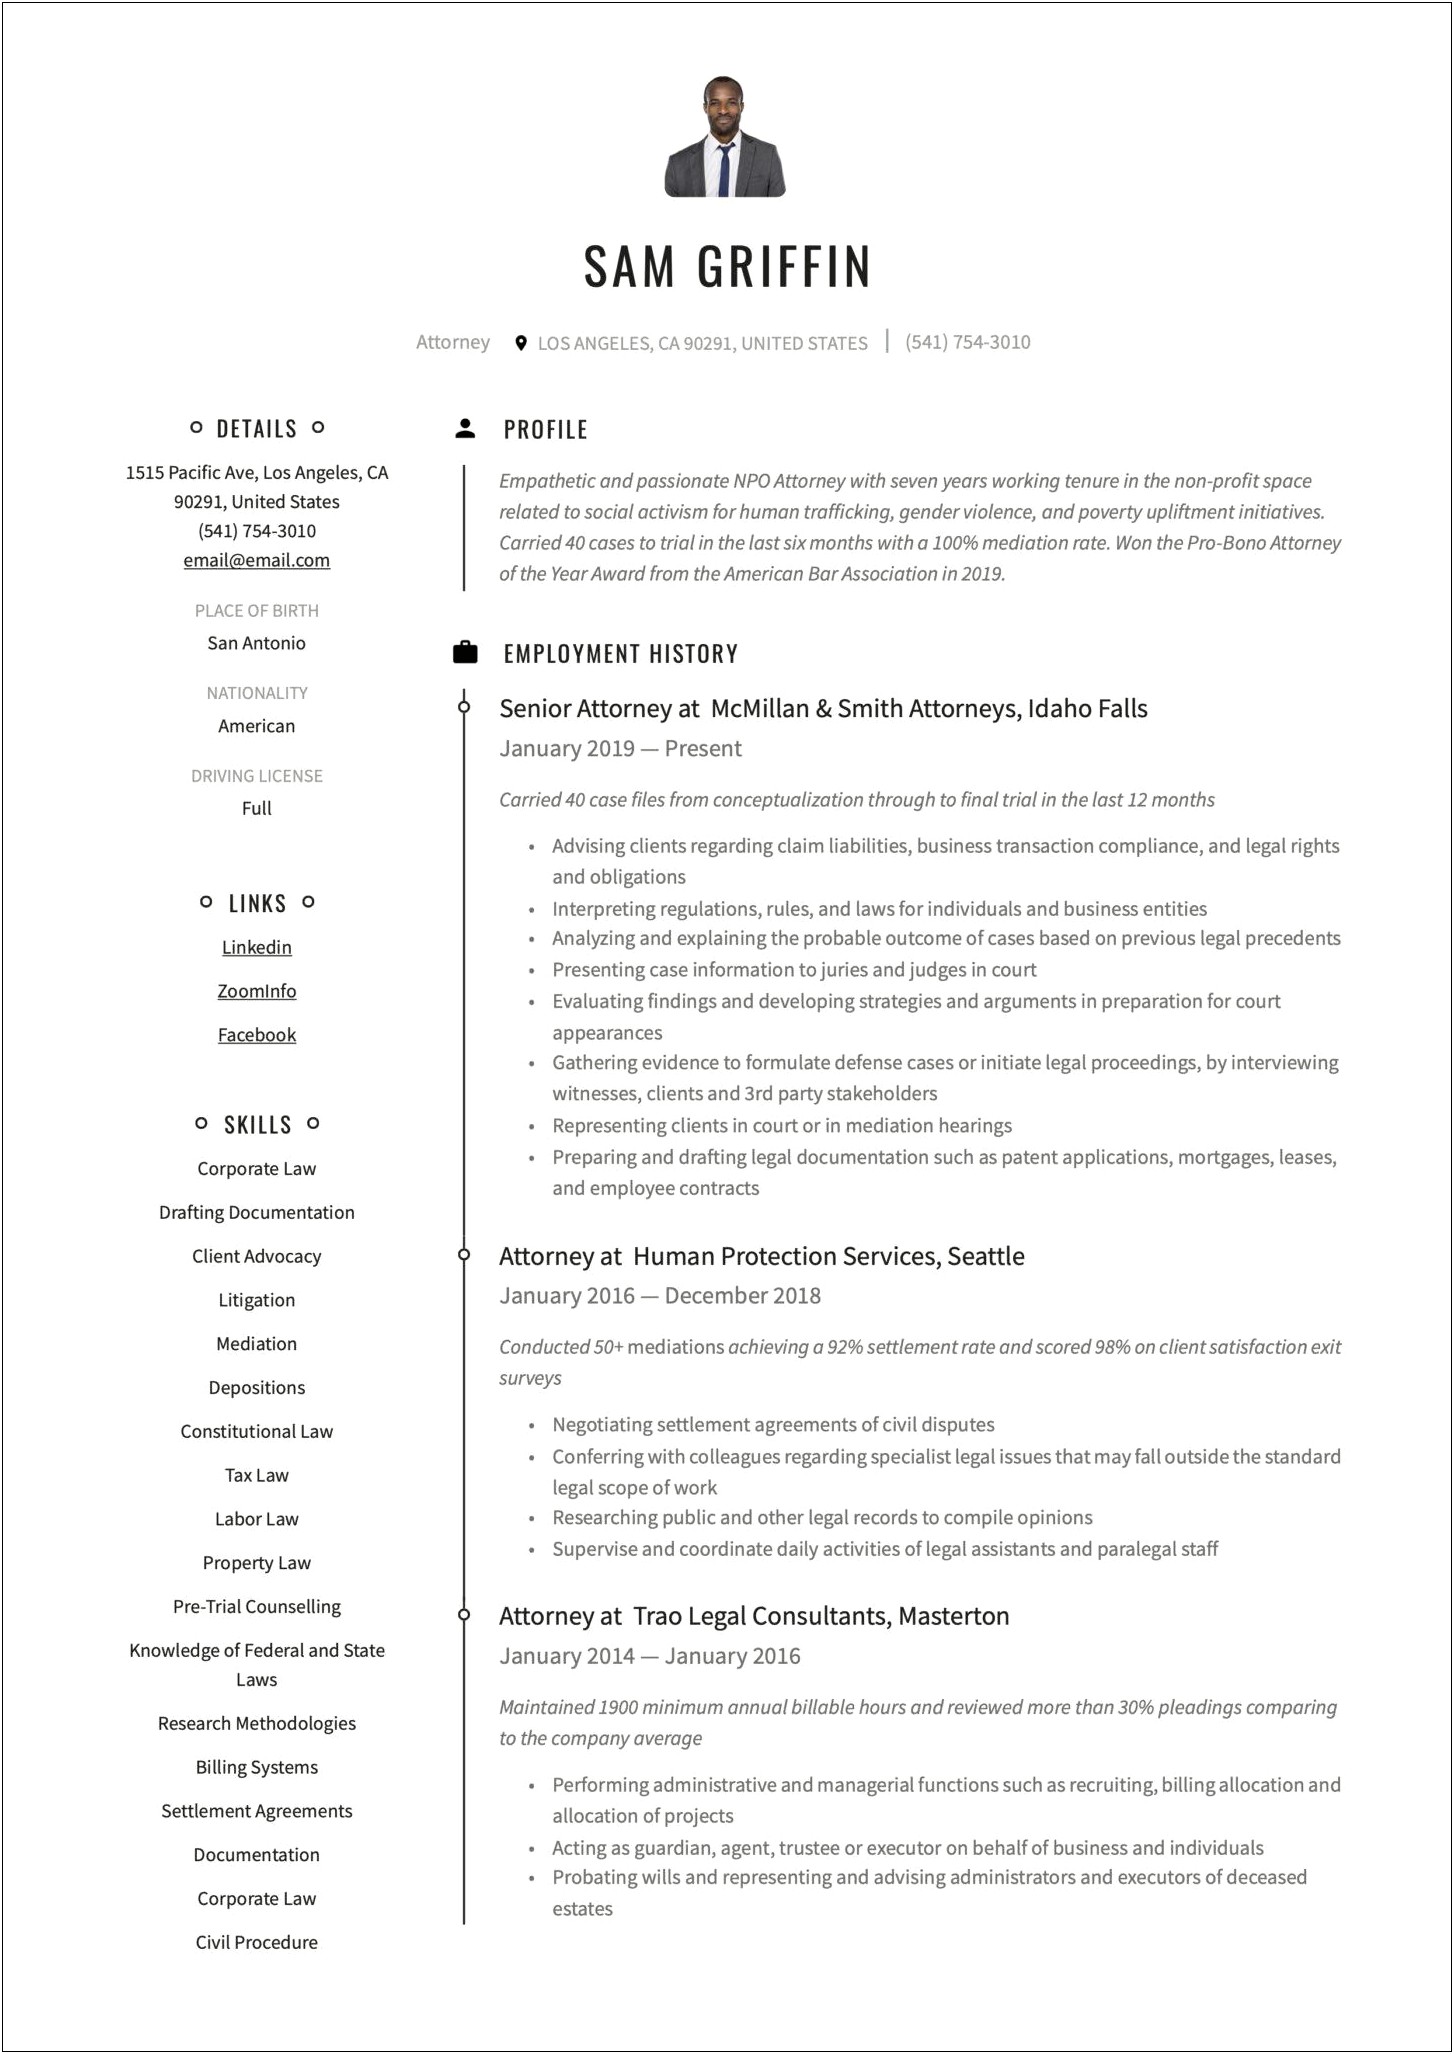 Resume Skills Section For A Lawyer